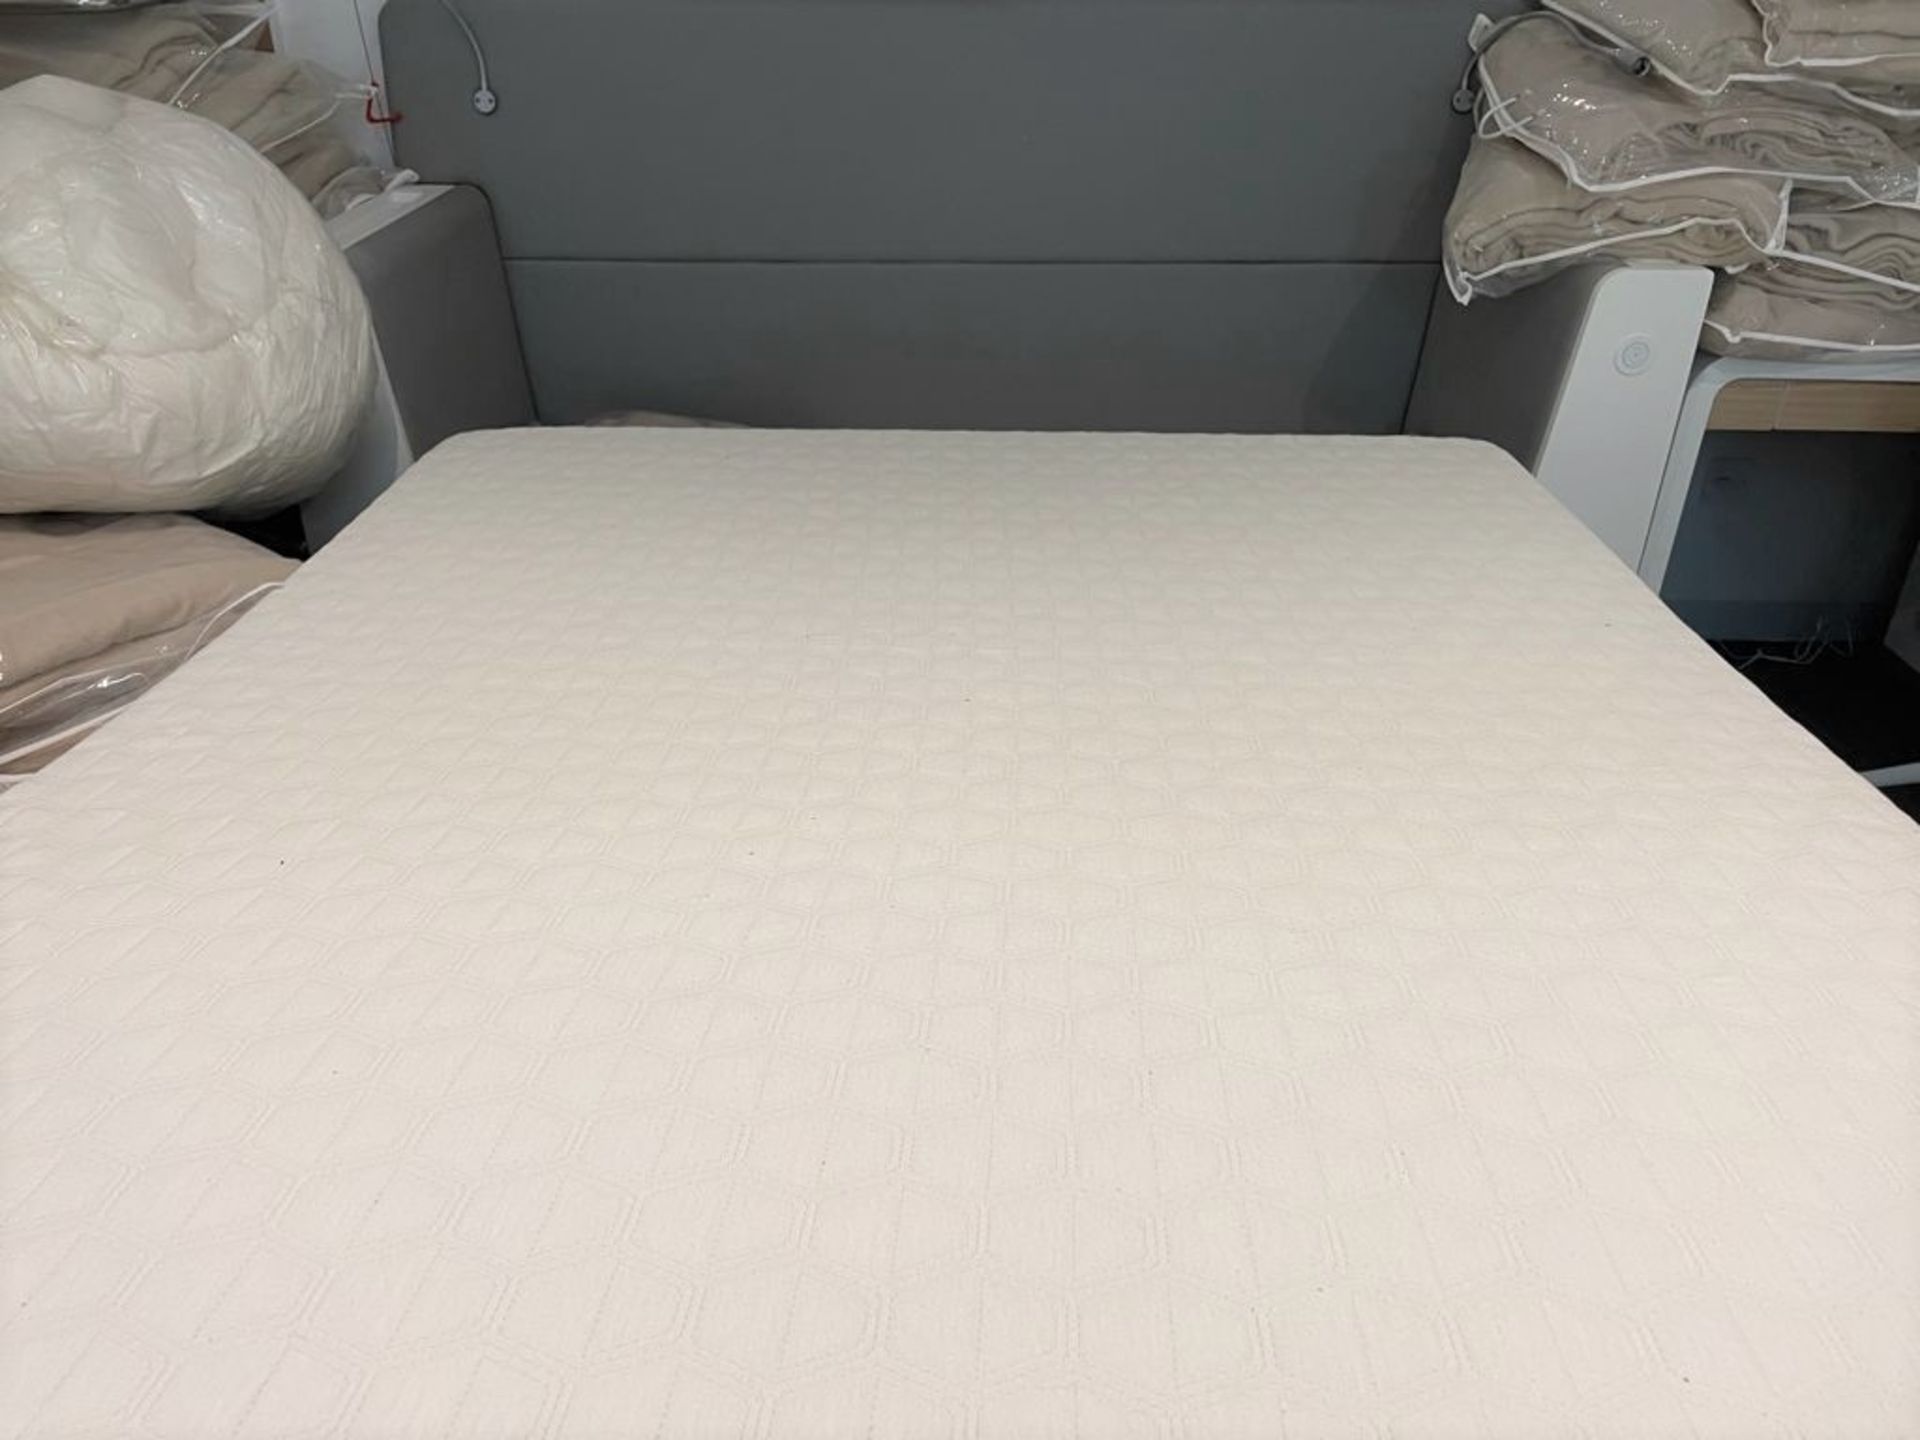 1 x Double Adjustable Space Saving Smart Bed With Serta Motion Memory Foam Mattress! - Image 10 of 11